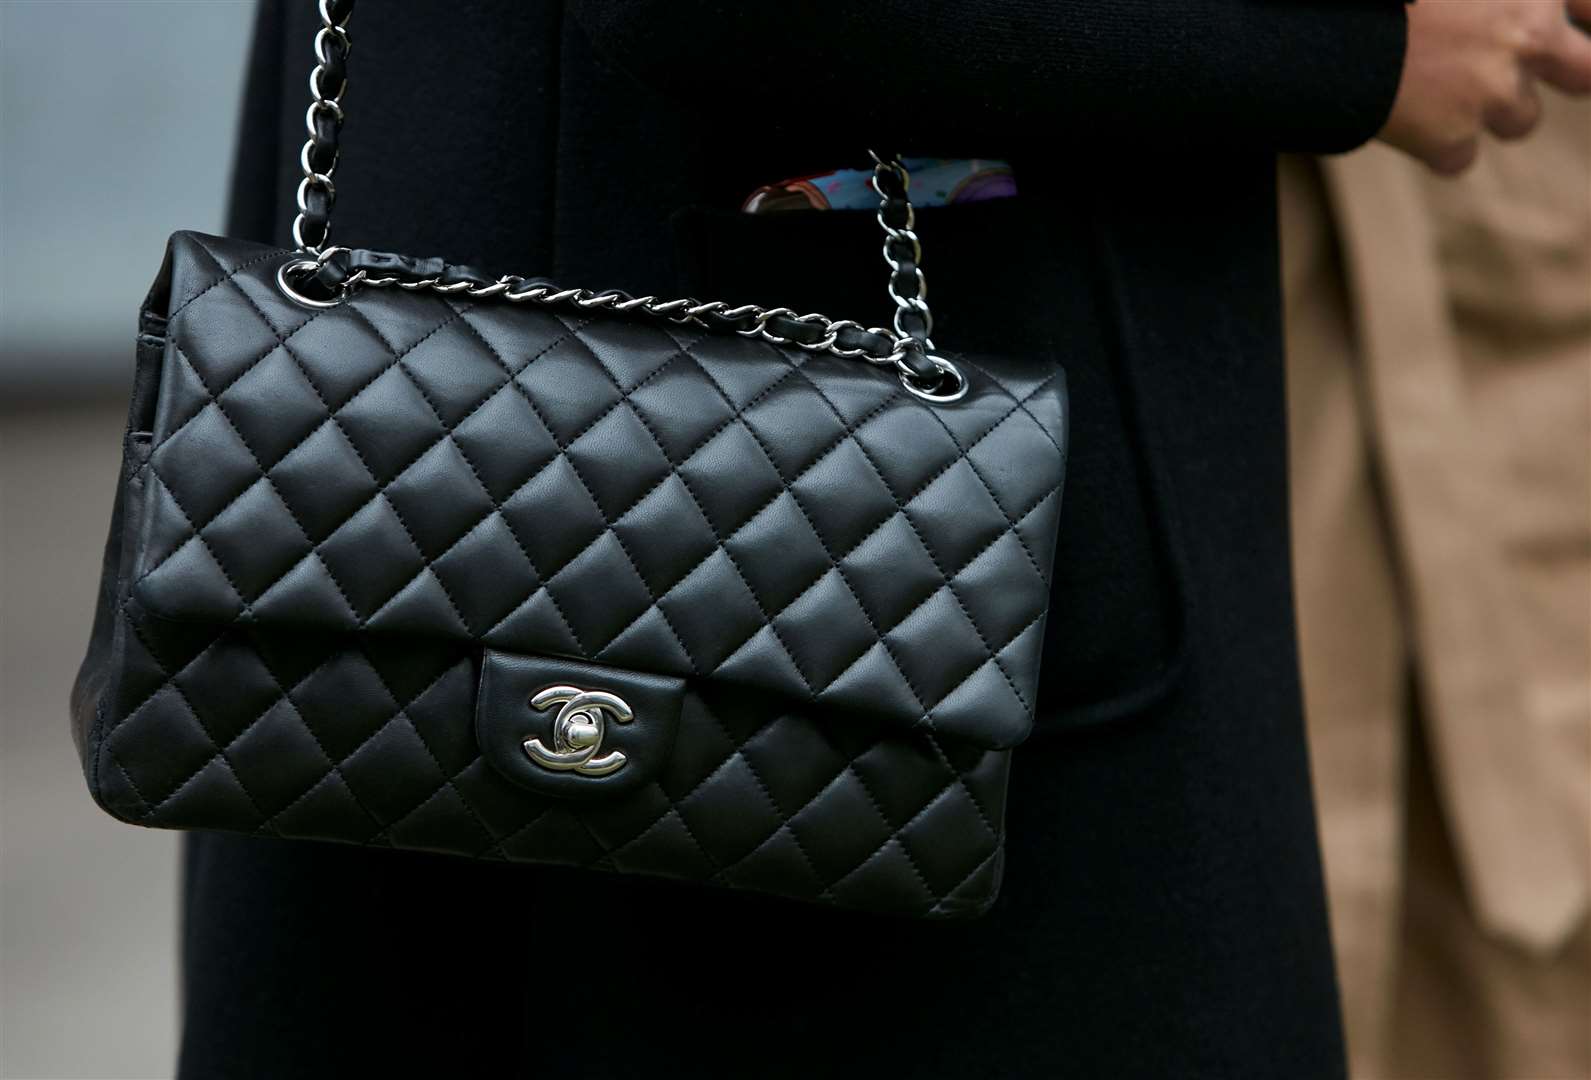 The employee reportedly bought bags from the likes of Chanel, though she claimed they were fakes. Stock picture: iStock